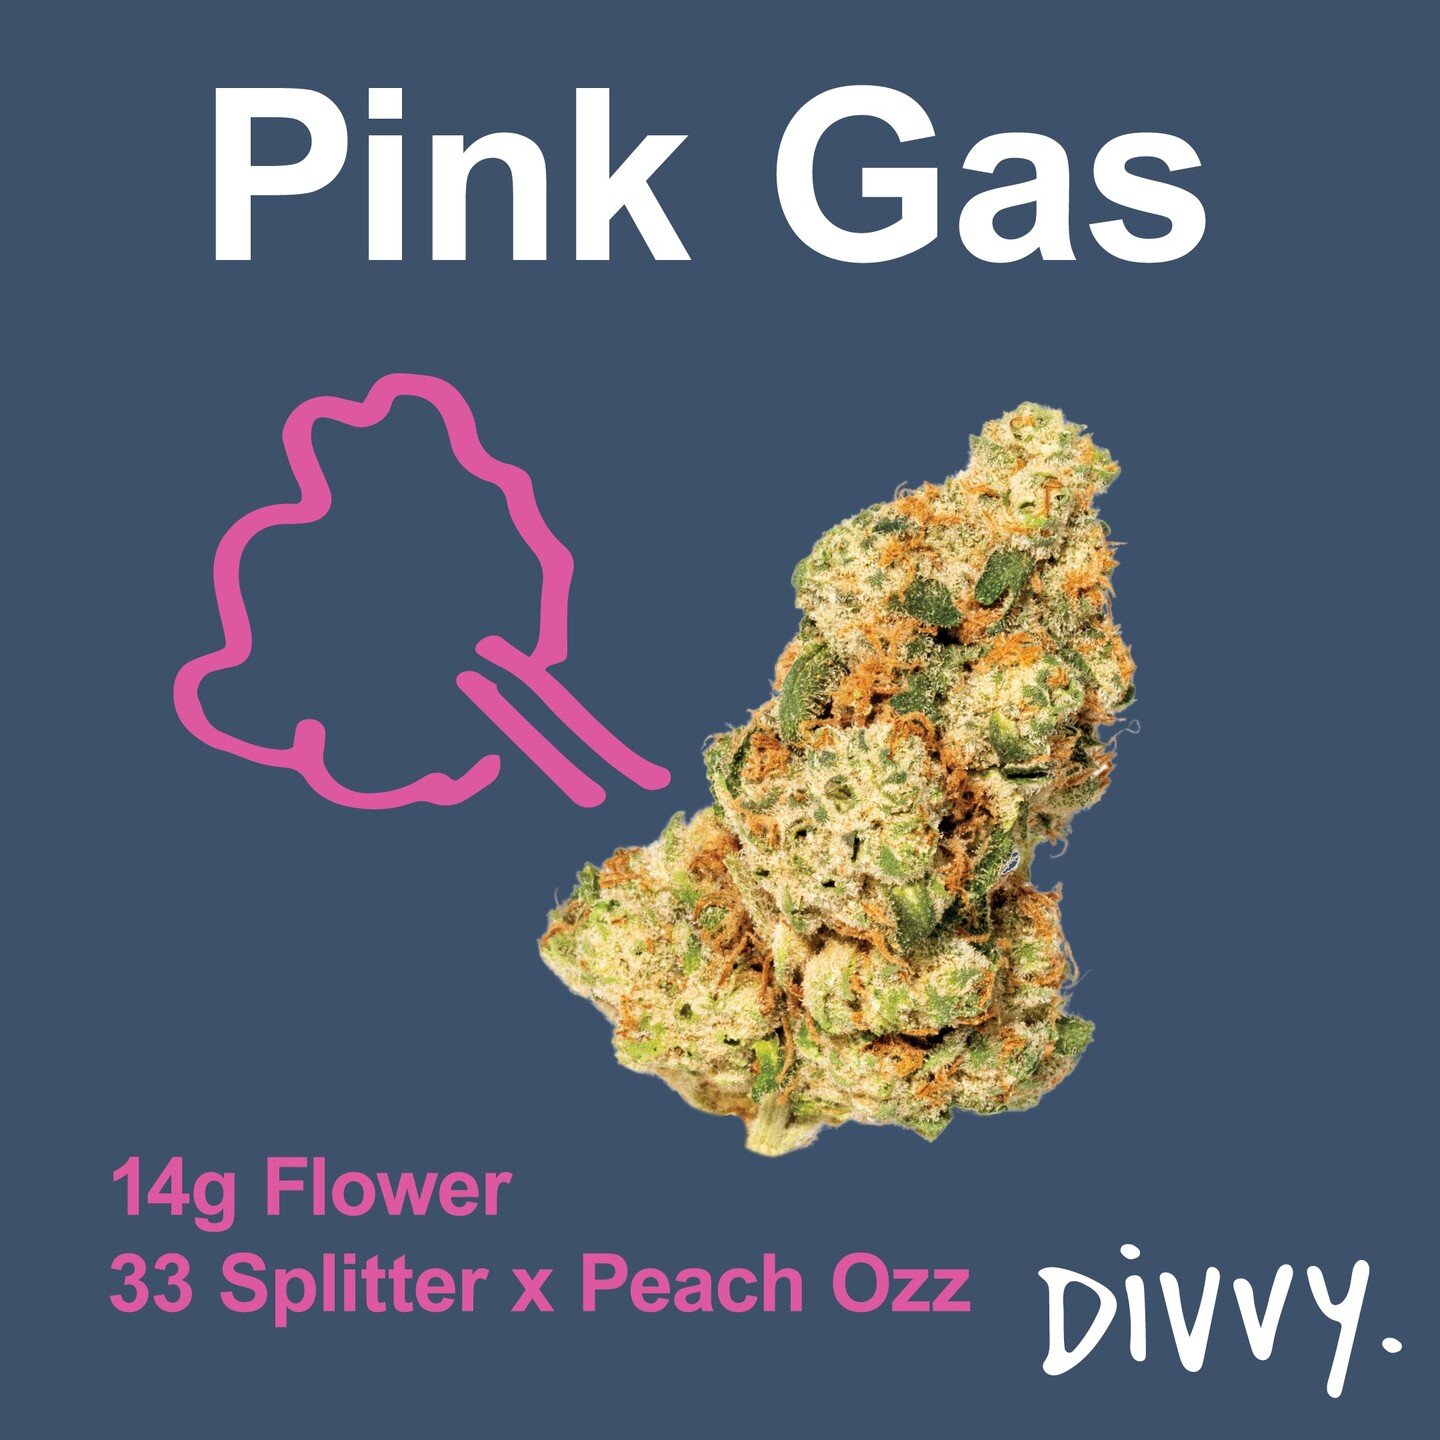 💖🌬️ Exciting news from @divvycannabis! Meet the sensational Pink Gas &ndash; she's pink, she's gassy, and she's a dazzling cross of 33 Splitter and Peach Ozz! 🍑✨ Revel in the allure of big resinous buds, and delight your senses with a potent fuel 